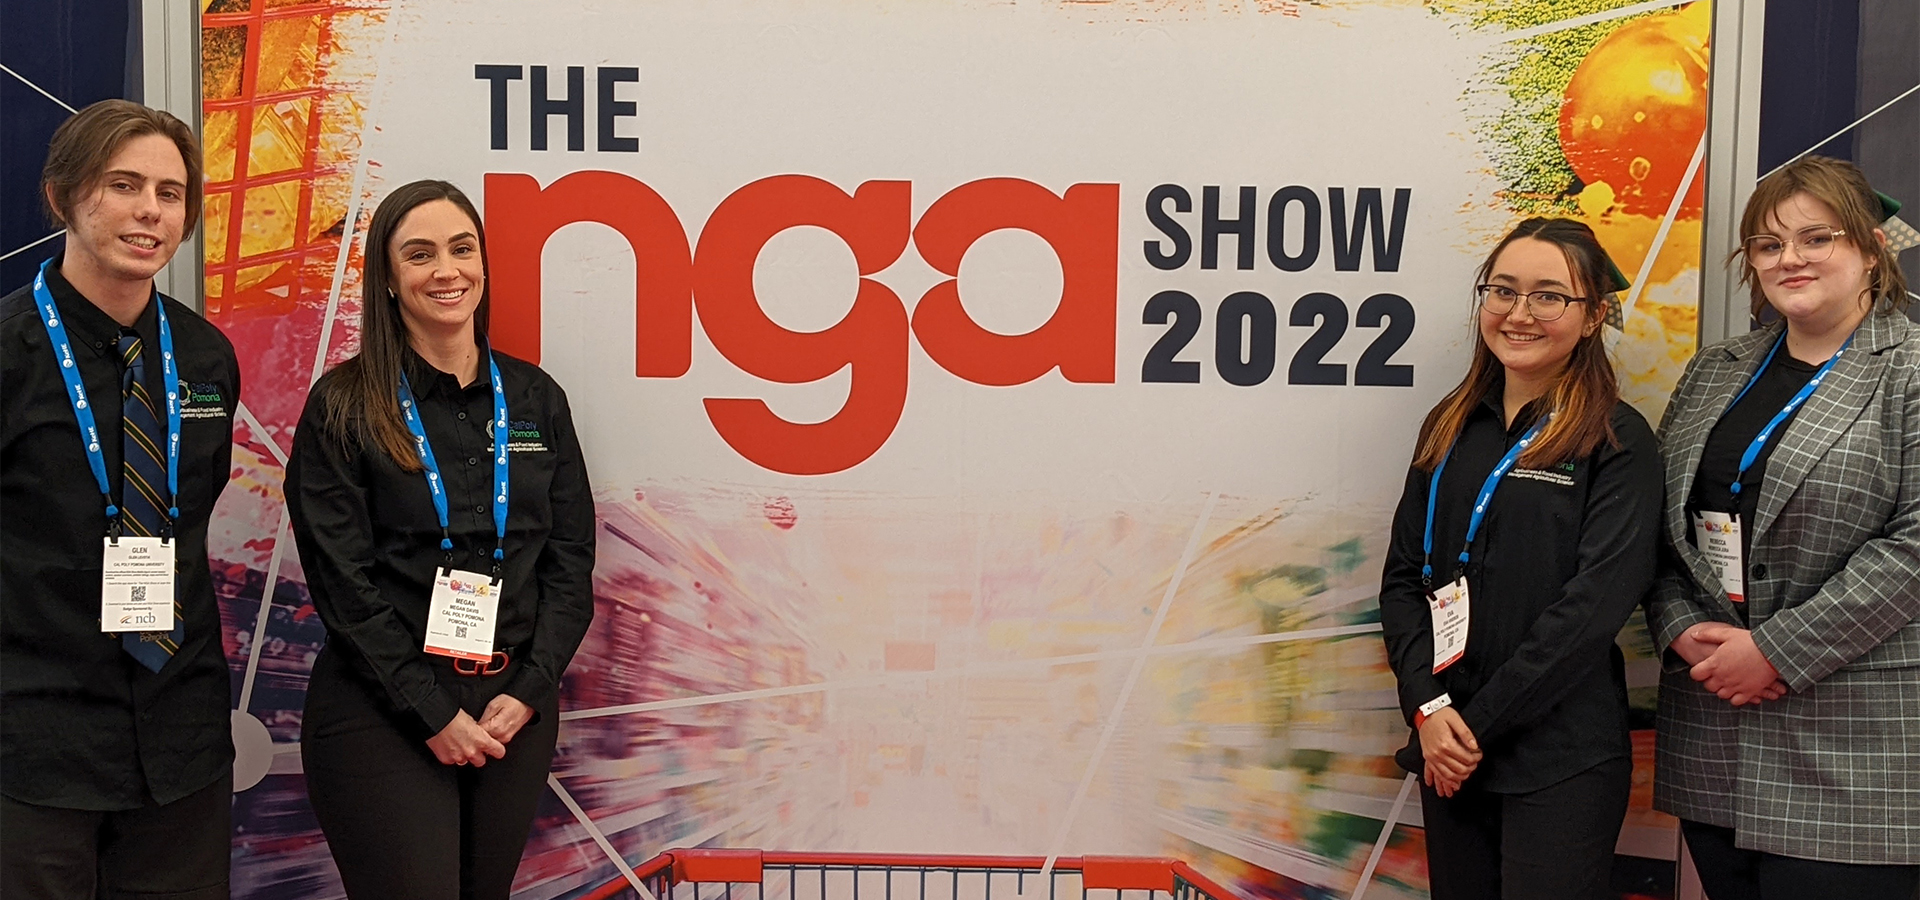 The four Cal Poly Pomona students pose in front of an NGA Show poster.